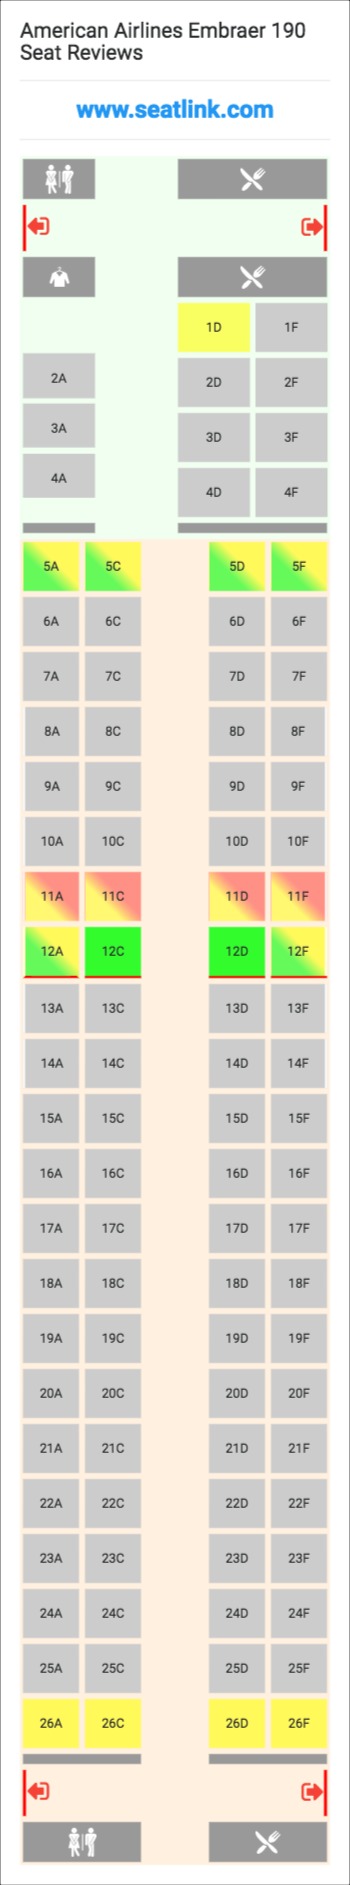 American Airlines Embraer 190 Seating Chart Updated July 2020